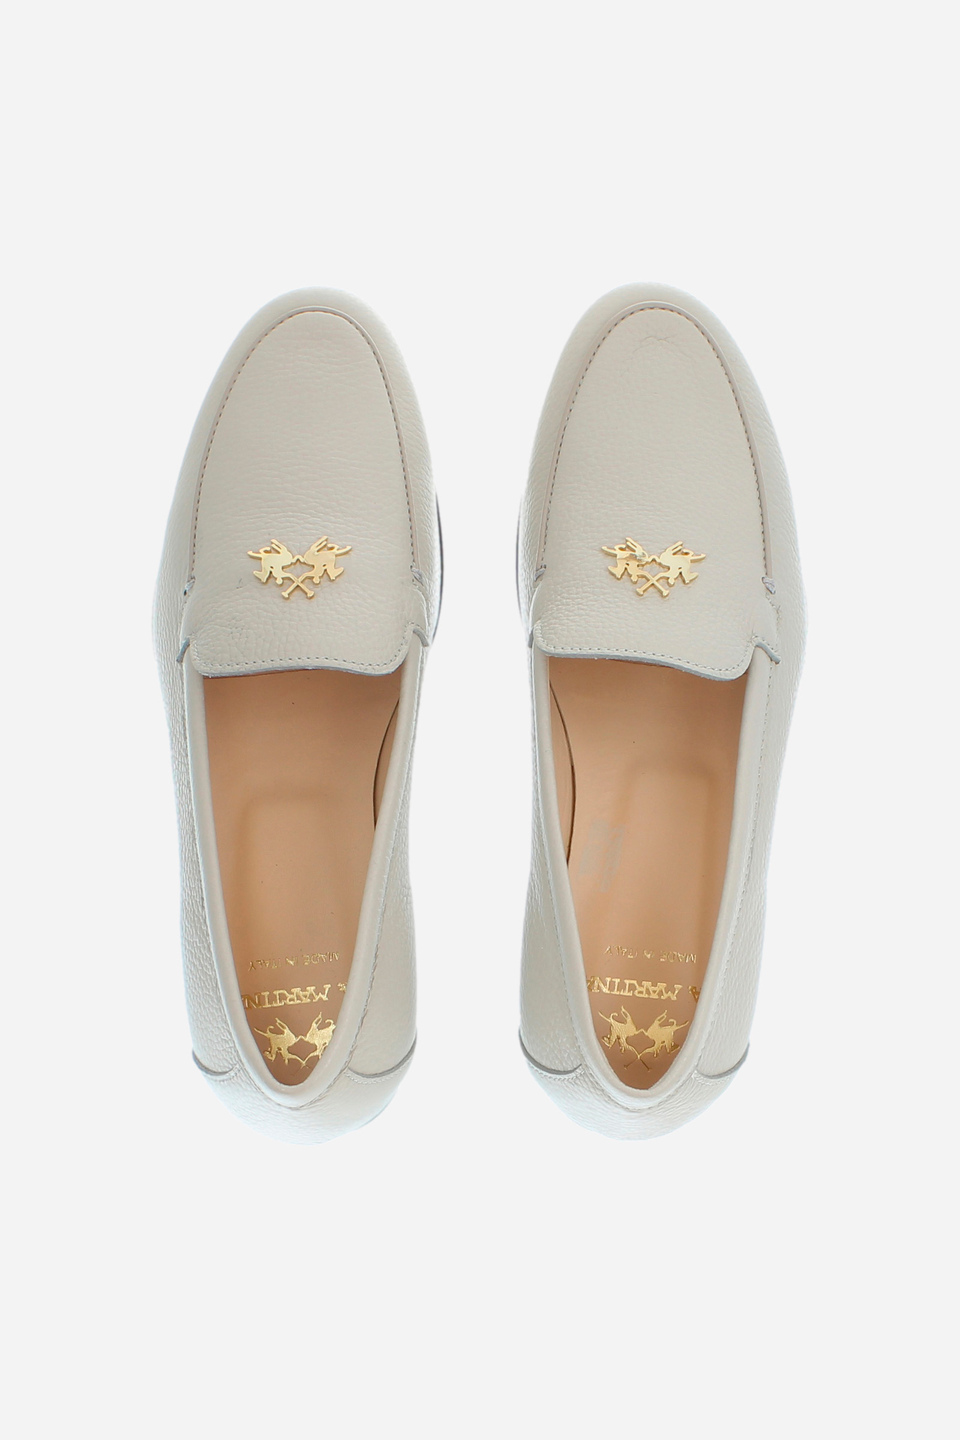 Women's leather loafers | La Martina - Official Online Shop